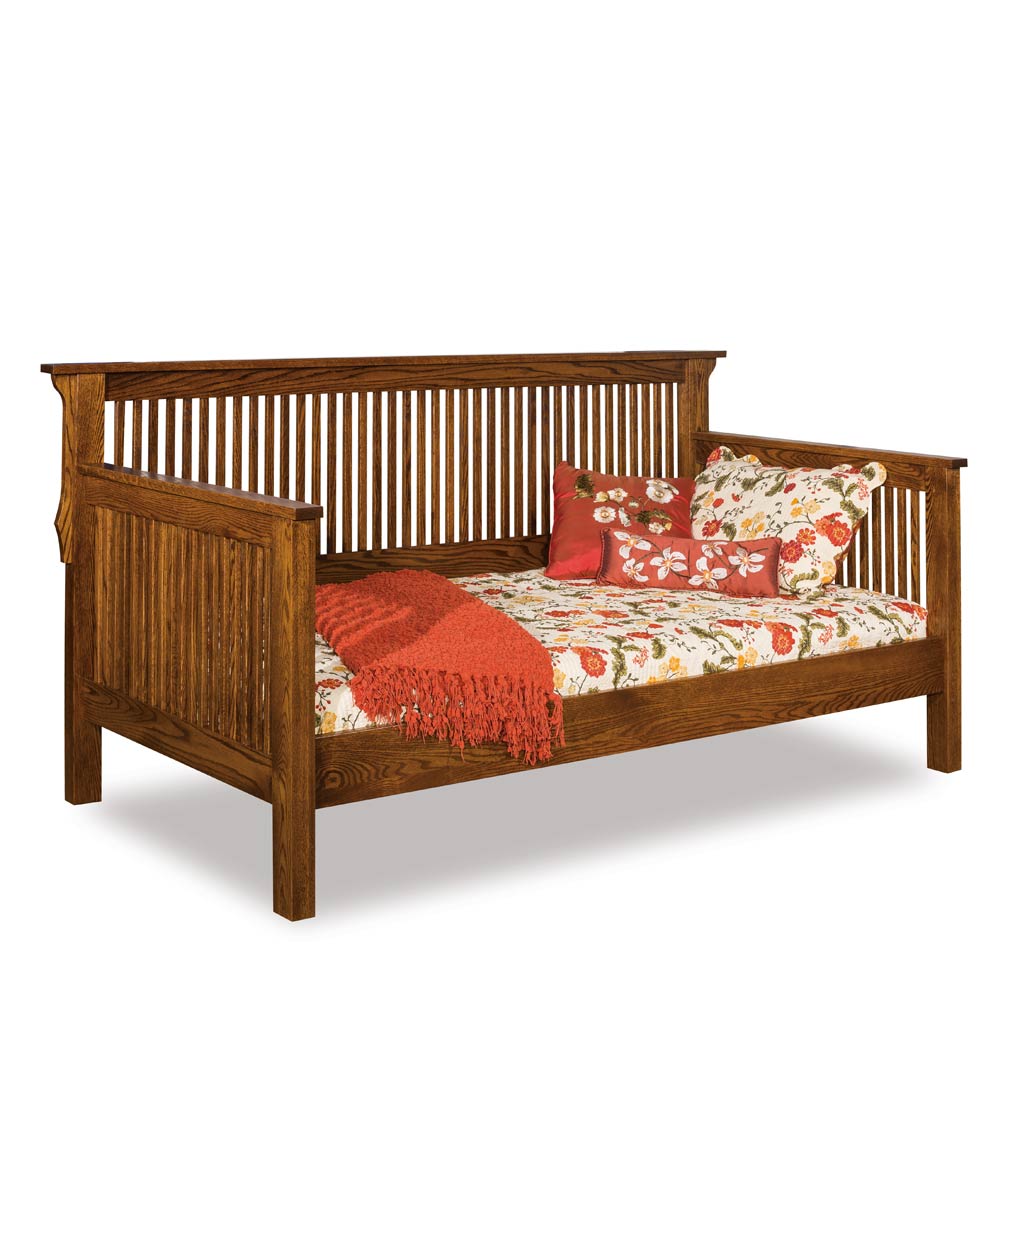 Amish Mission Day Bed [Shown in Oak with Vintage Antique stain]